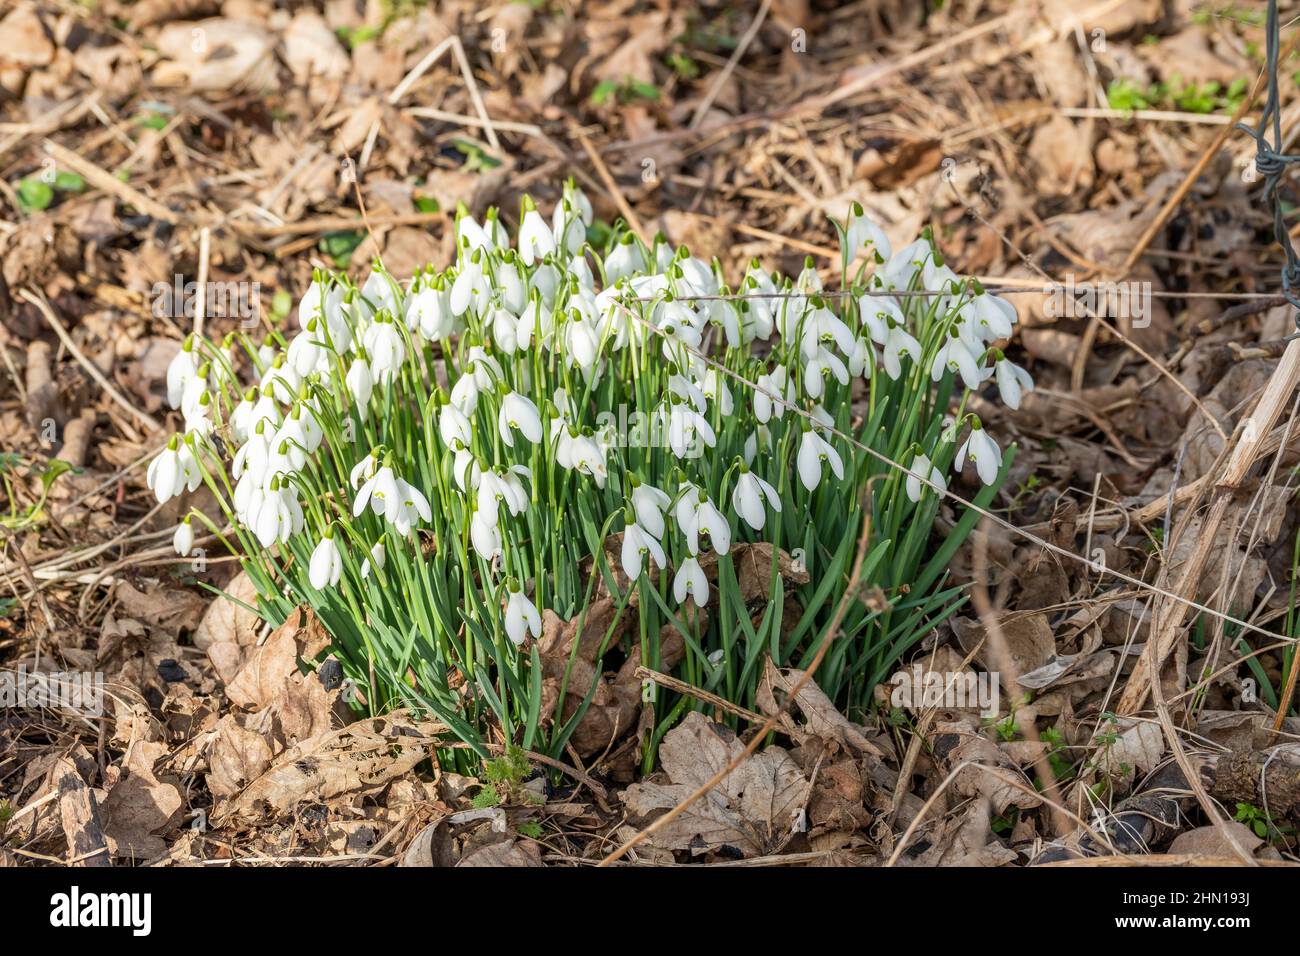 Close up of a patch of wild snowdrops (Galanthus nivalis) in full bloom in the countryside with intentional selective focus and shallow depth of field Stock Photo